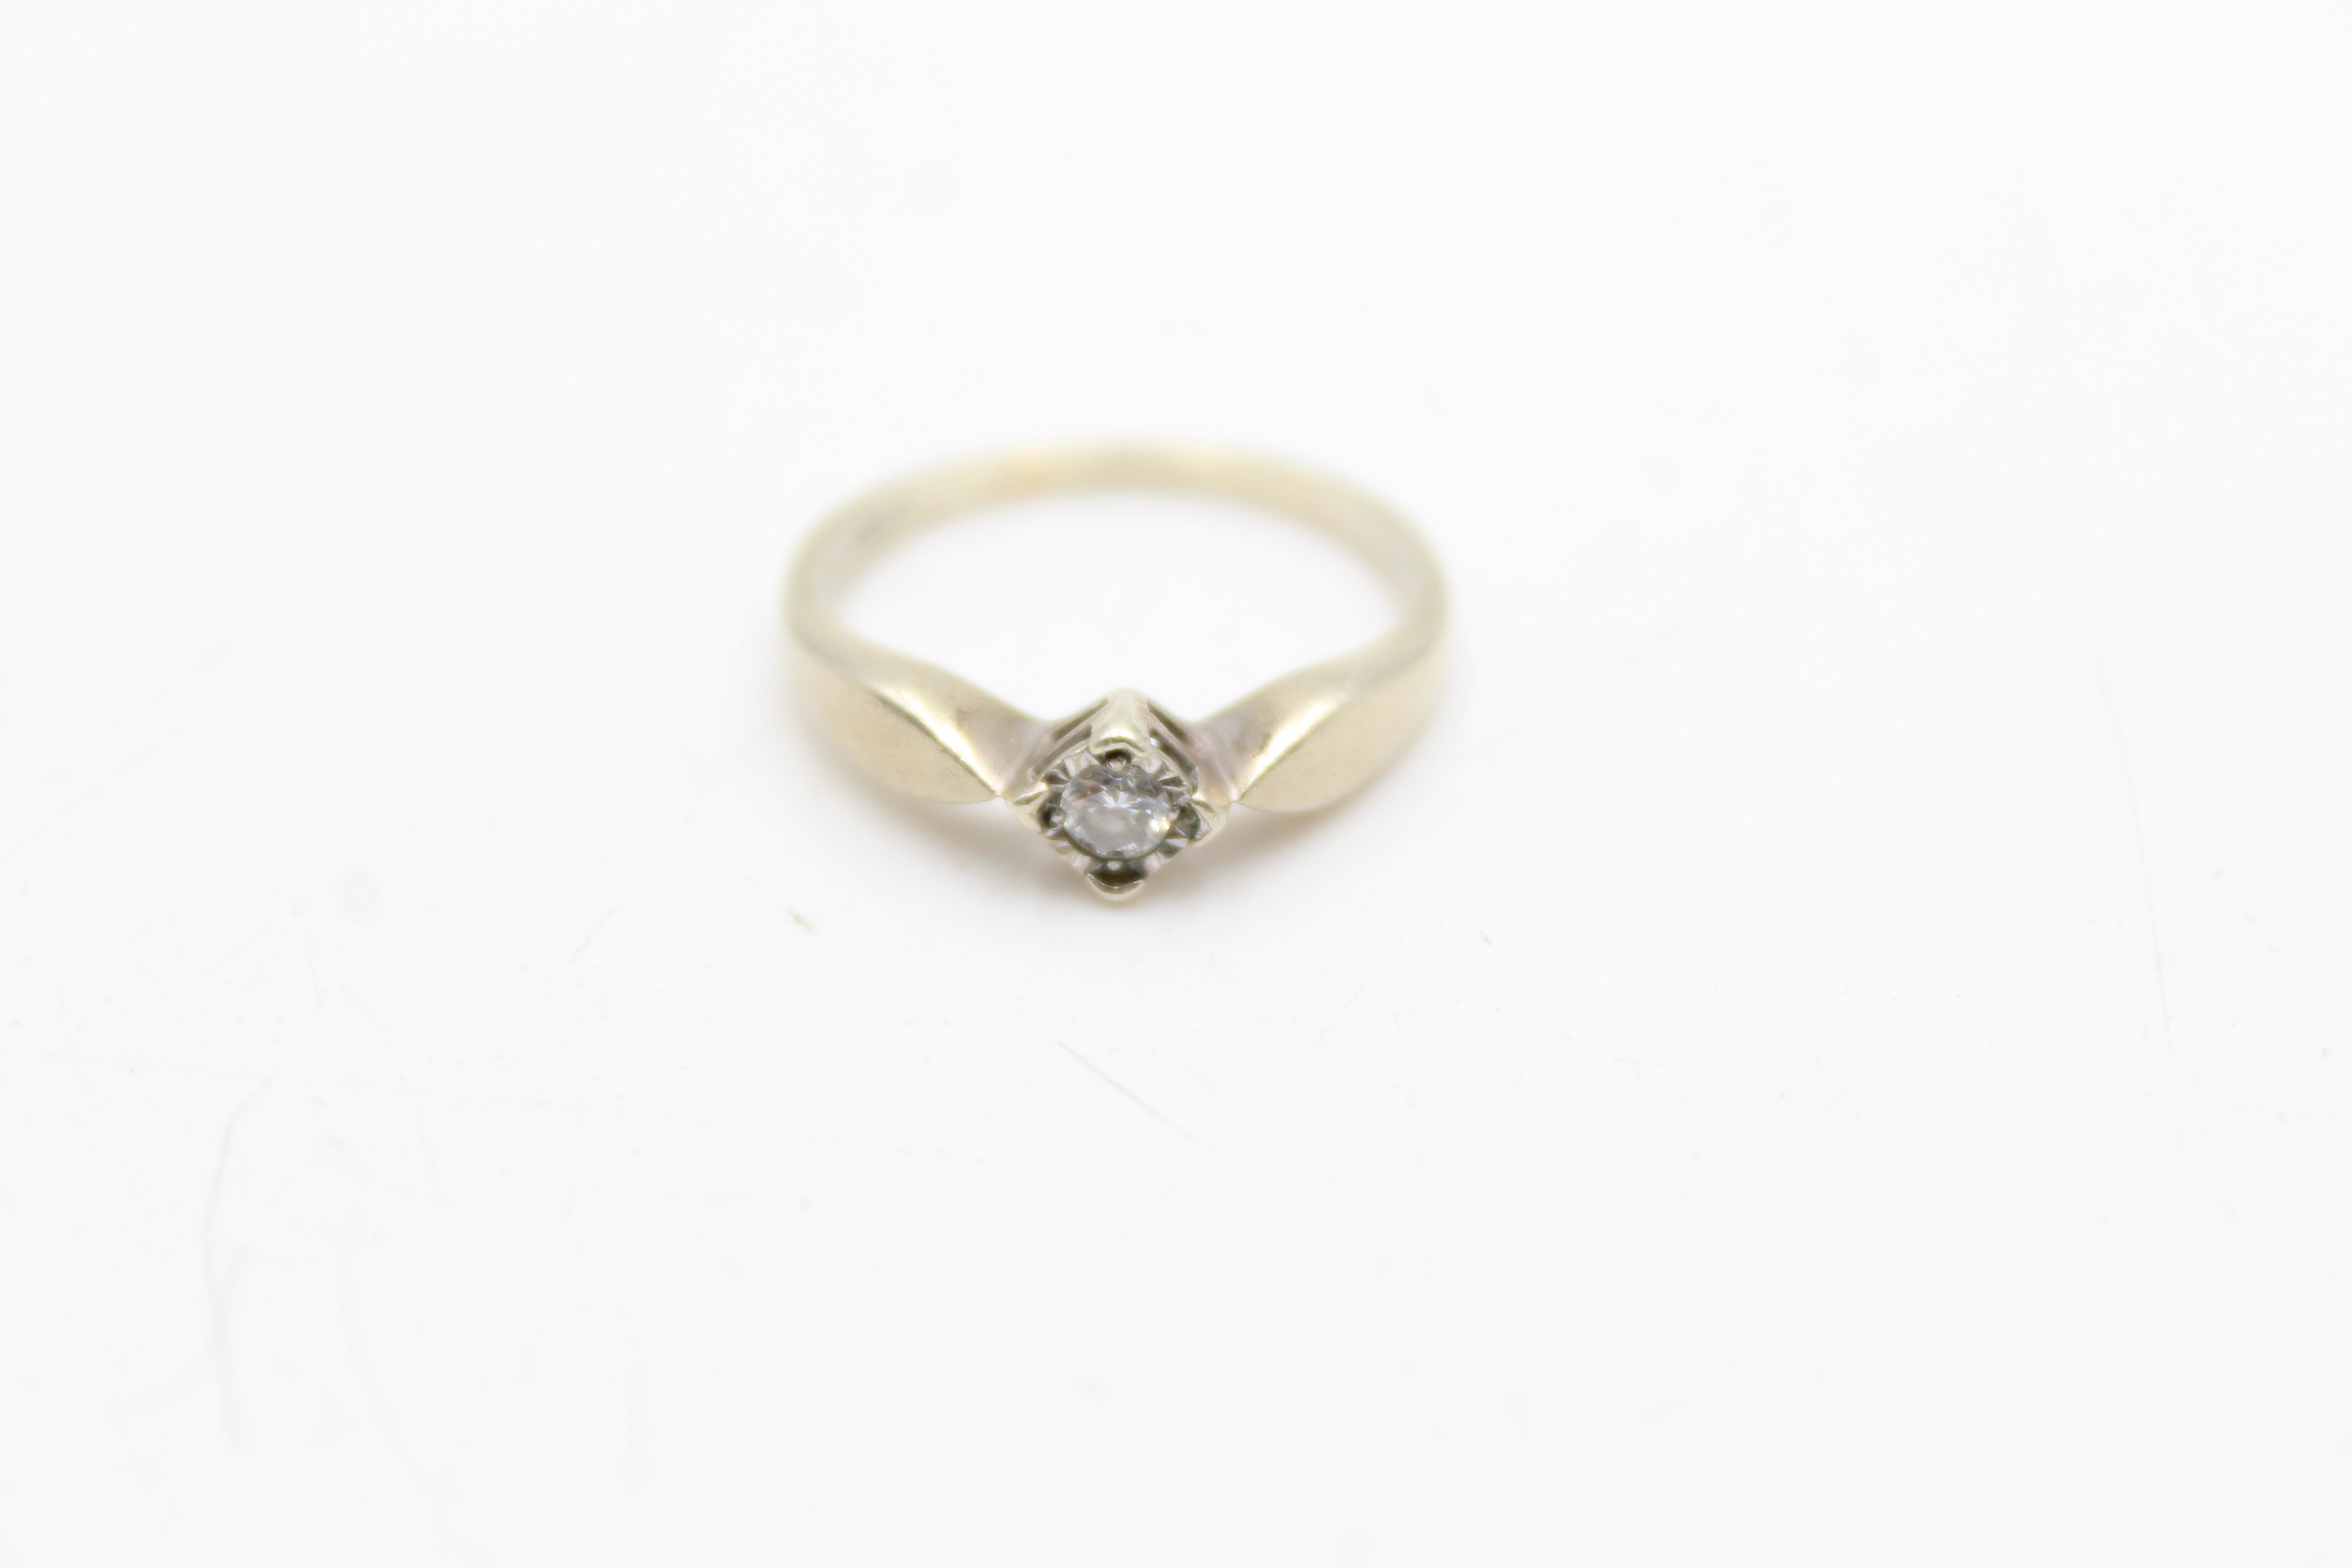 9ct gold diamond solitaire ring (2.7g) - Image 2 of 7